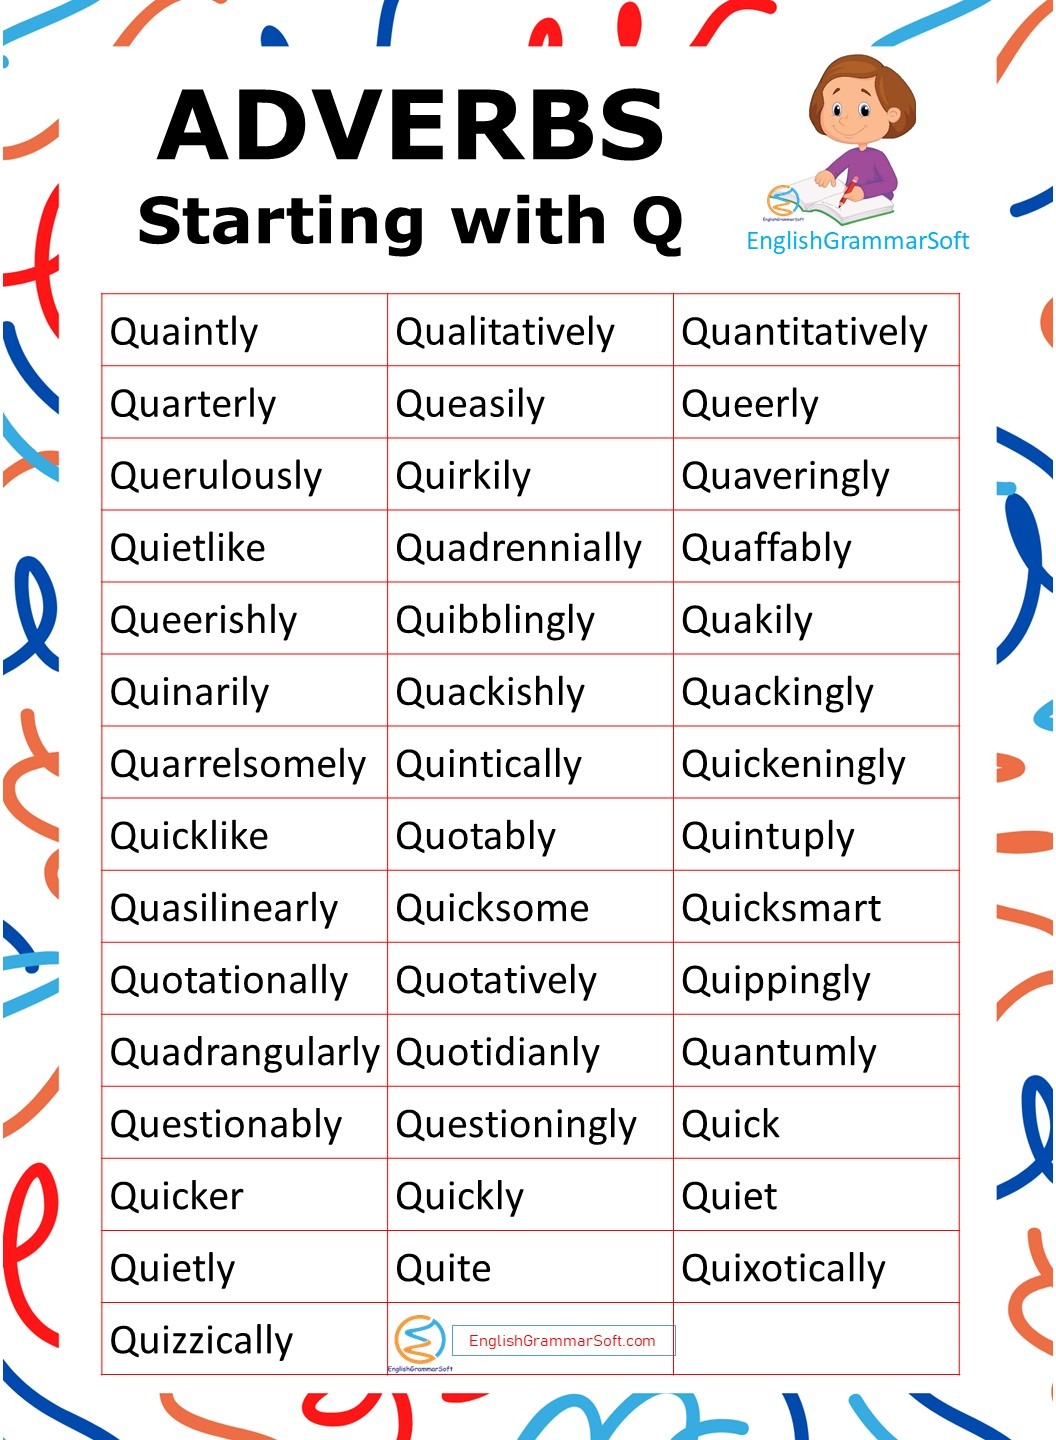 adverbs starting with Q